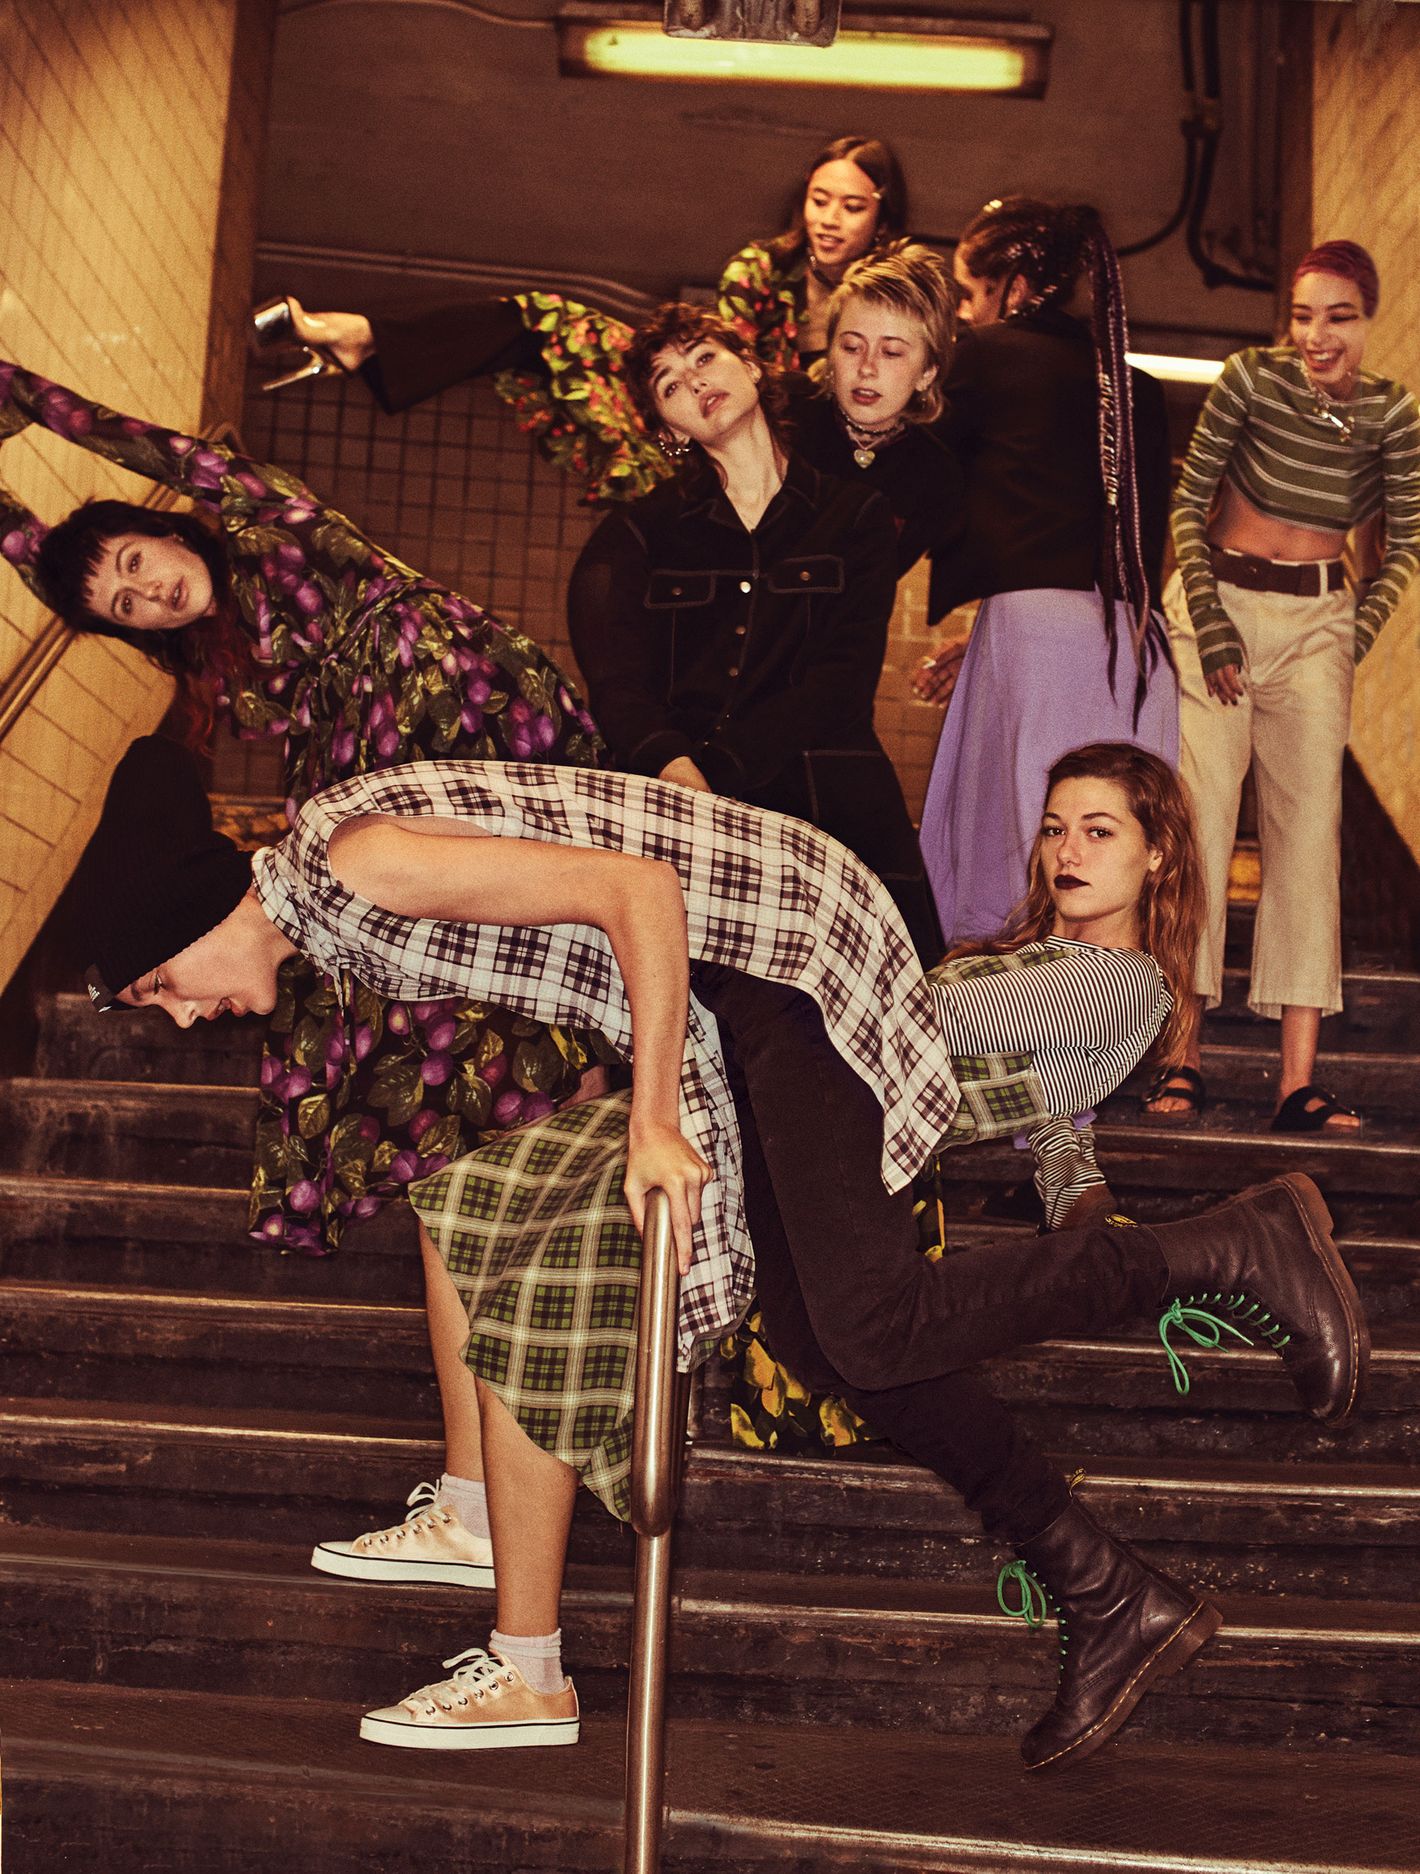 Marc Jacobs Brought Back His '90s Grunge CollectionHelloGiggles